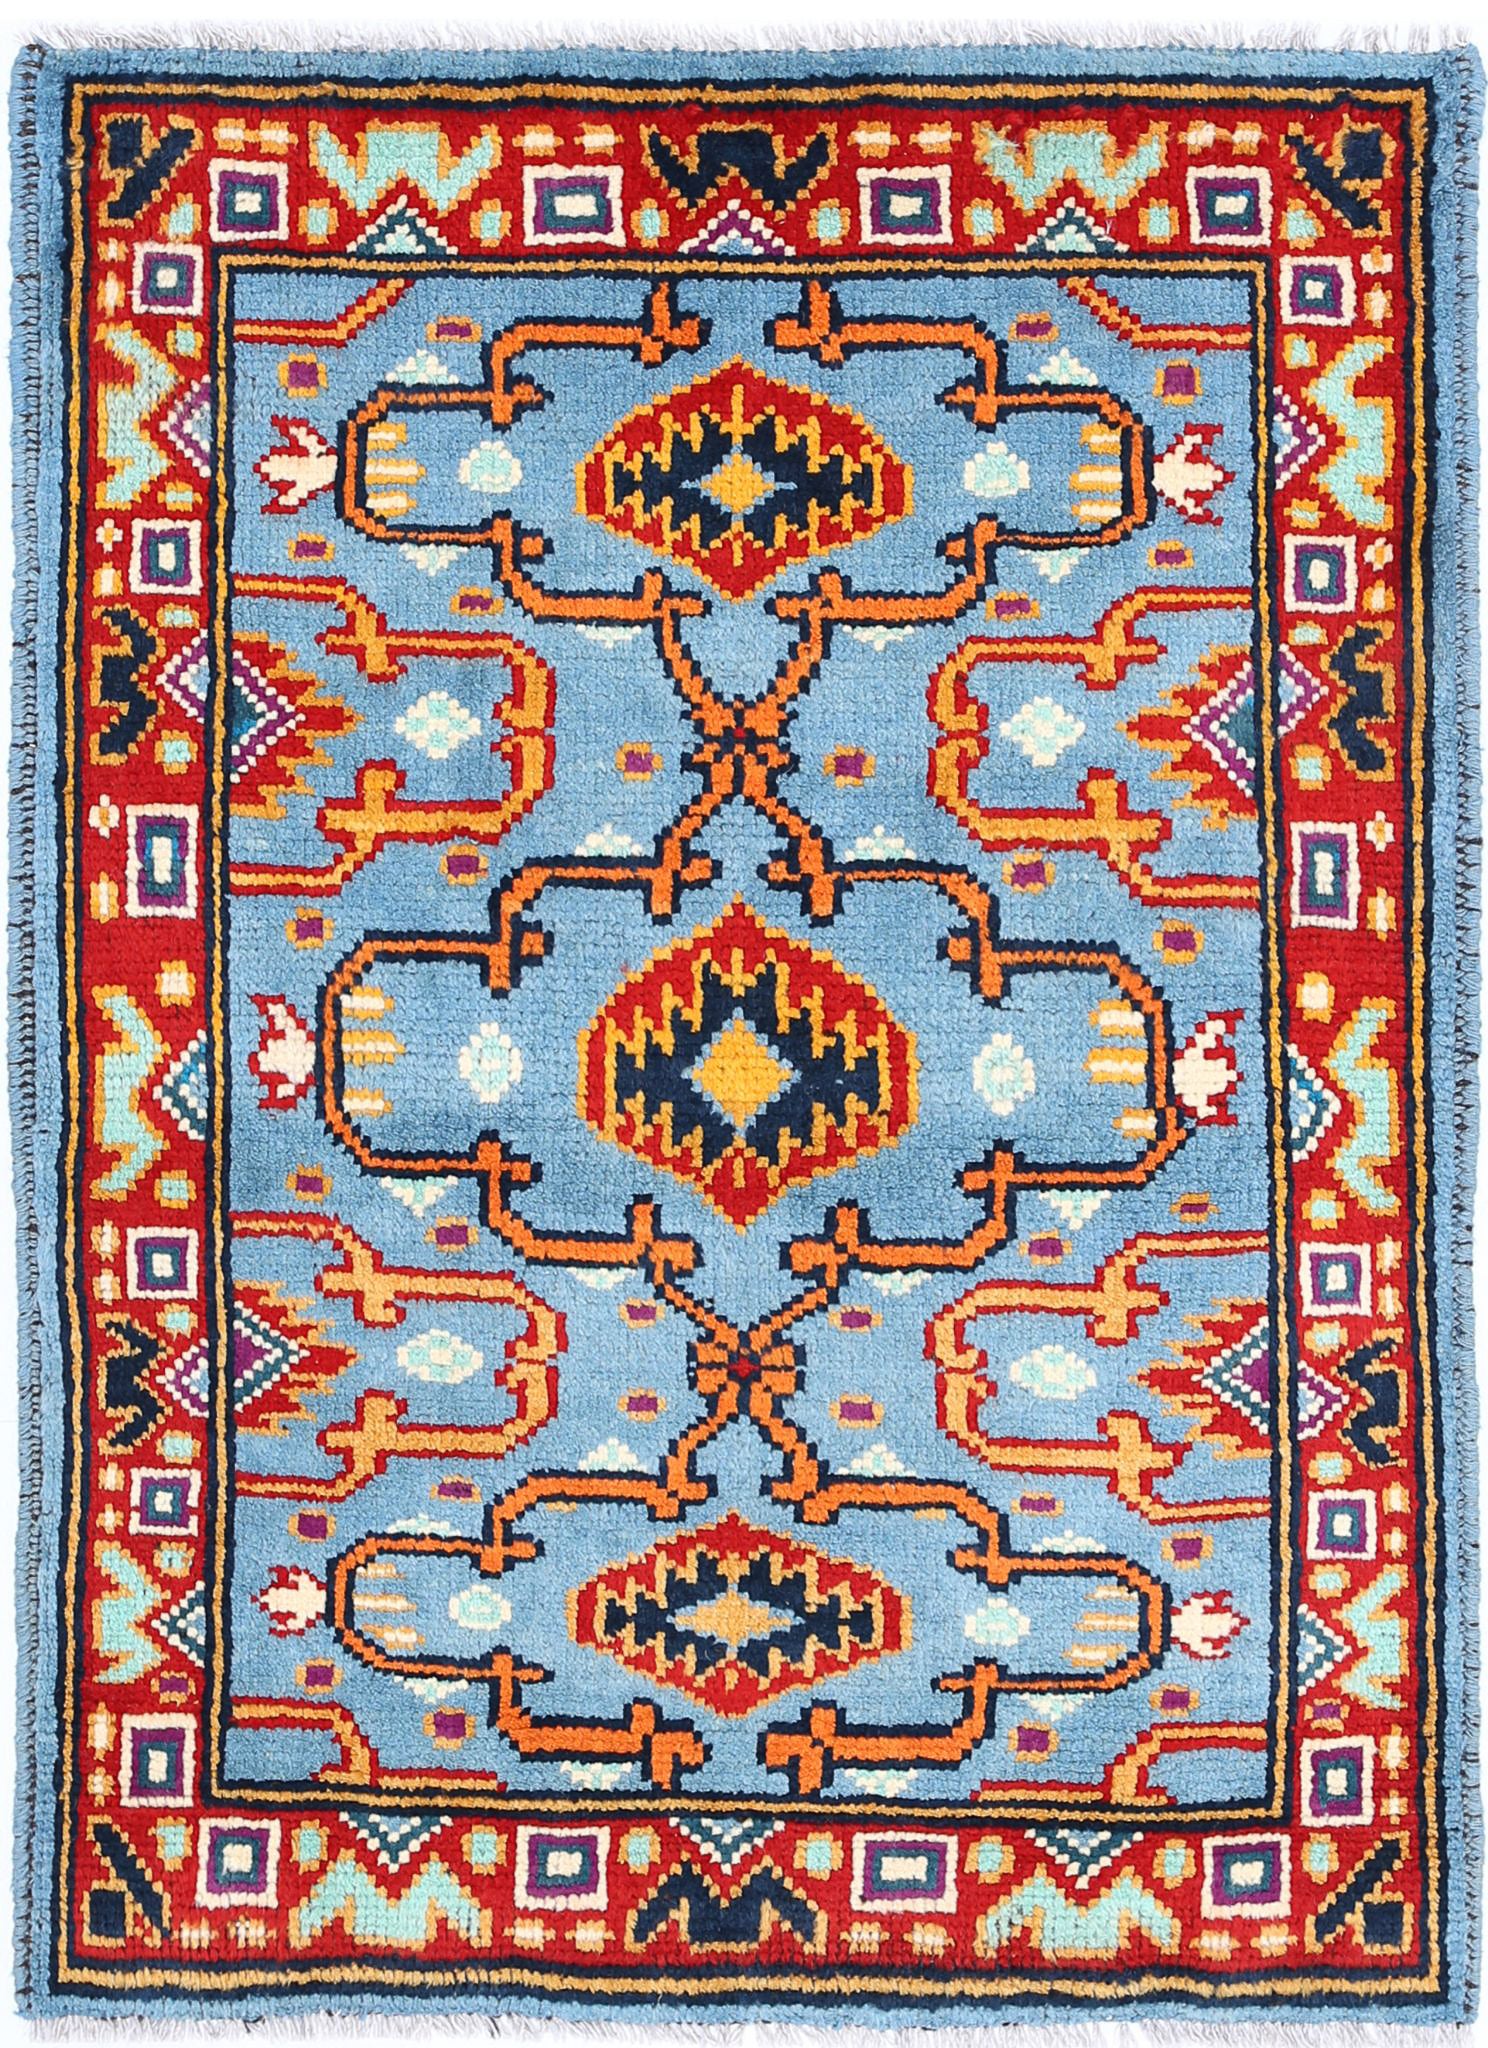 Revival-hand-knotted-qarghani-wool-rug-5014190.jpg